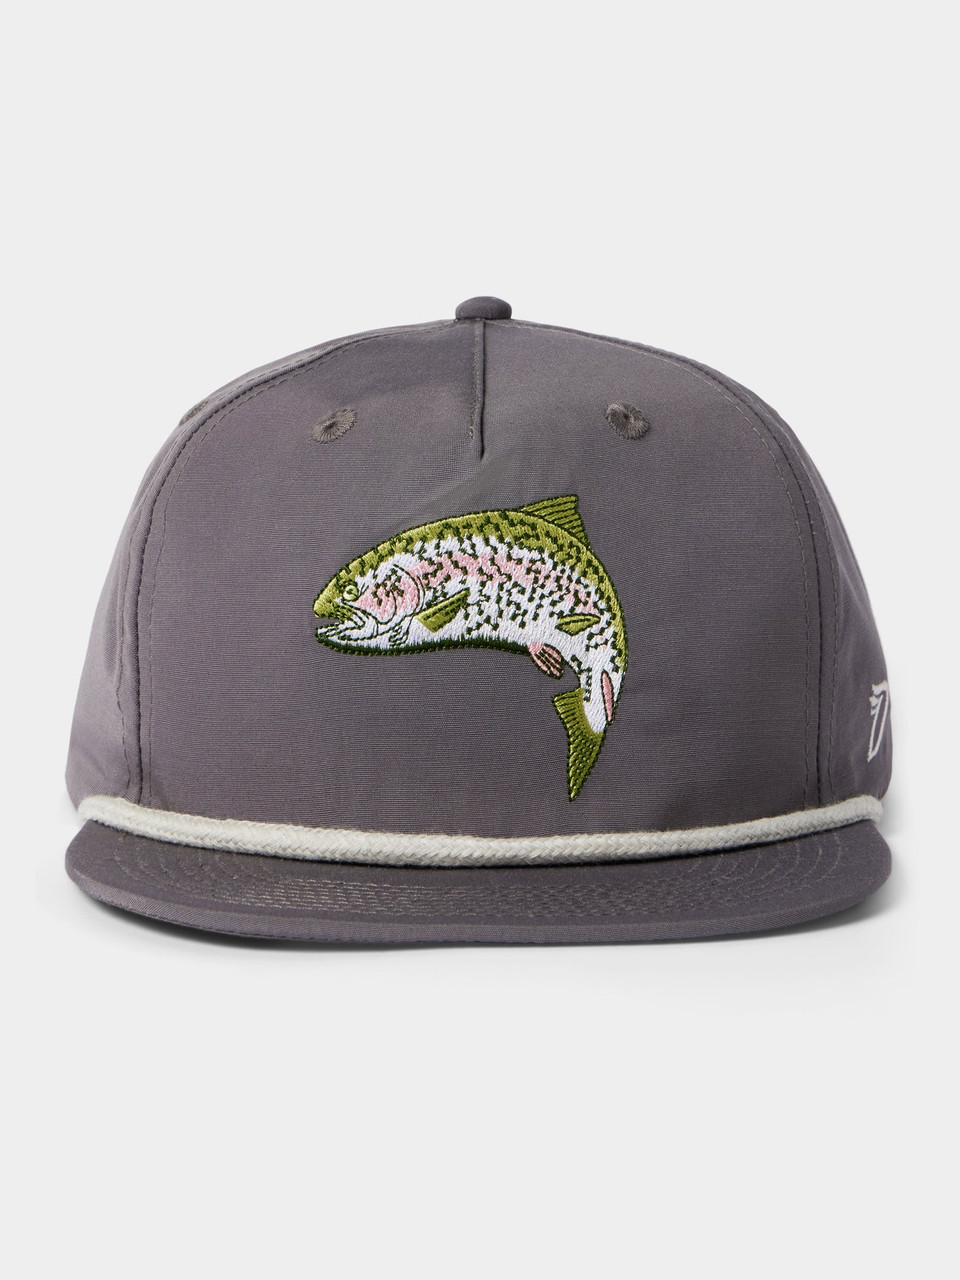 Duck Camp Trout Hat51635 - Gordy & Sons Outfitters